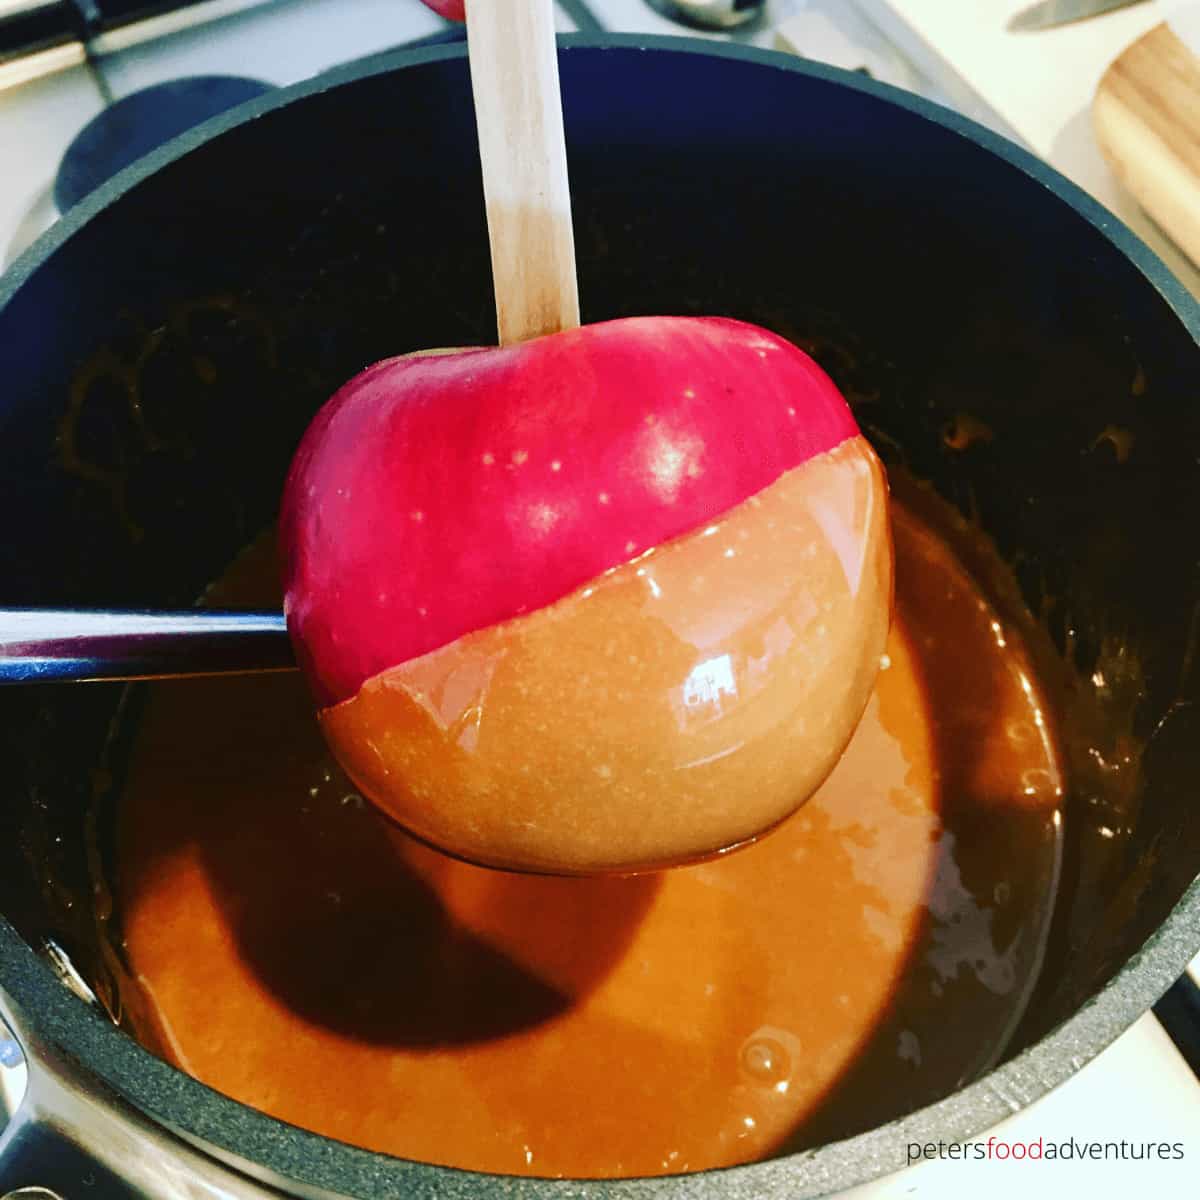 red apple dipped in caramel sauce